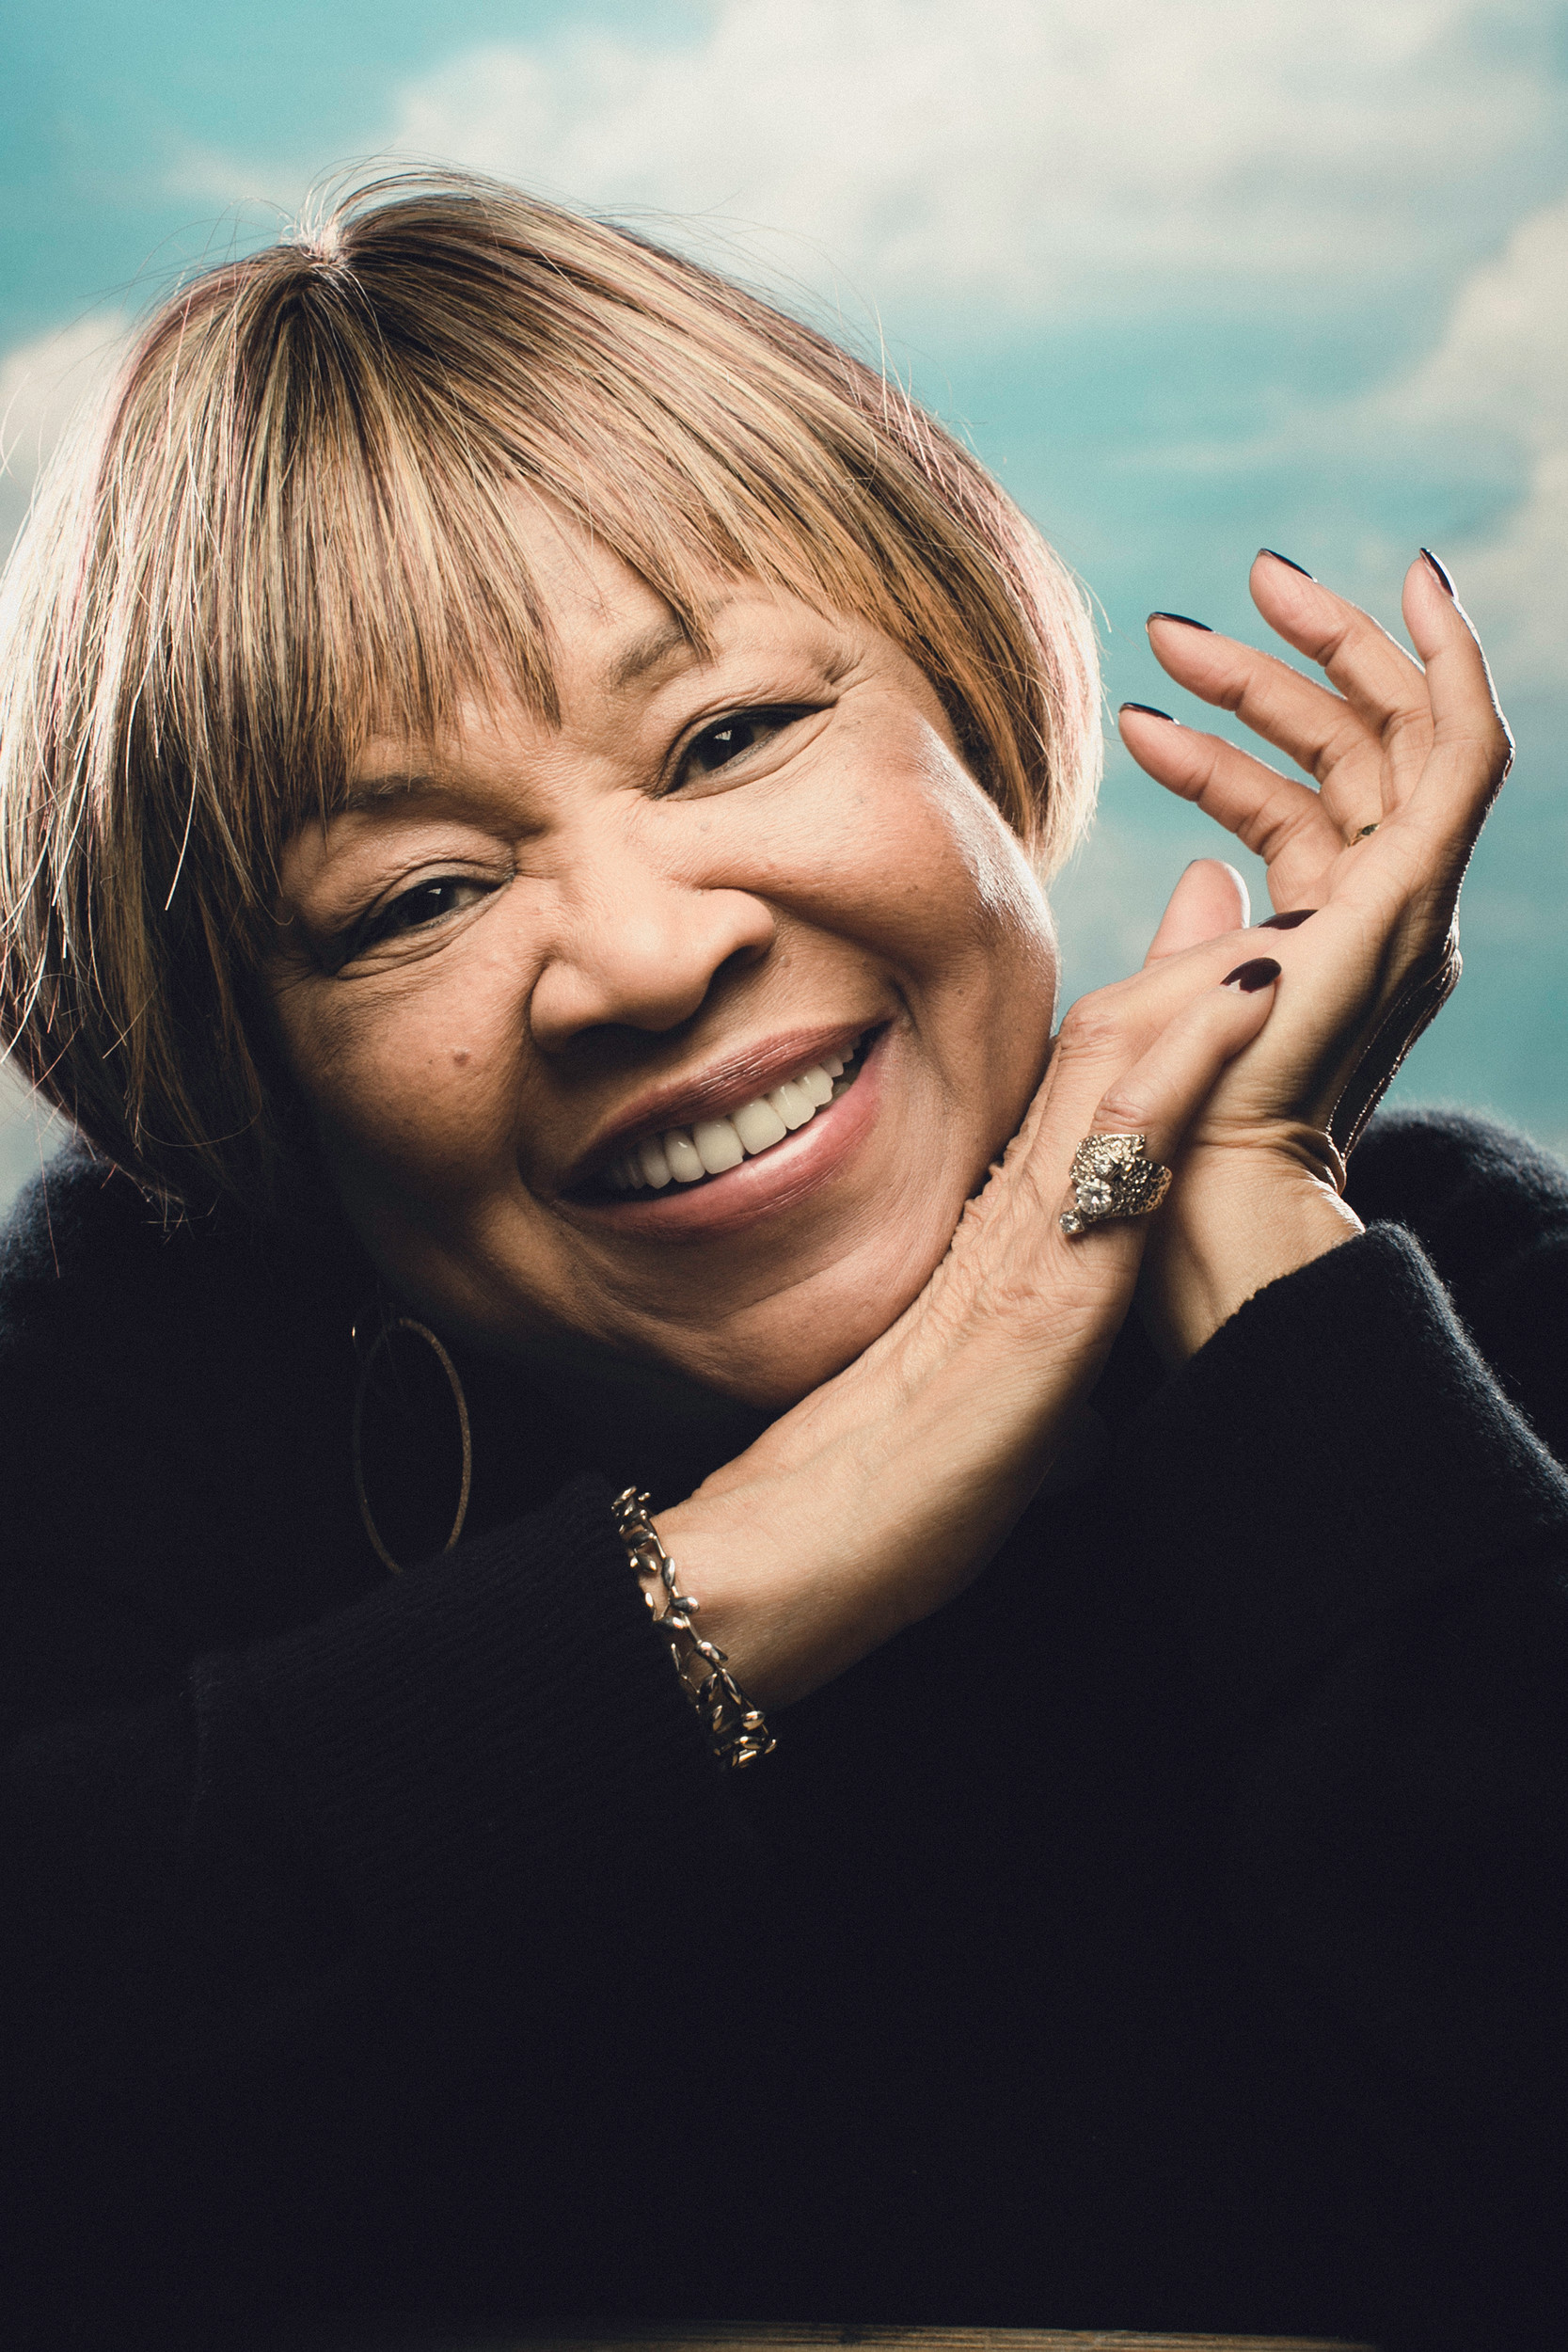 Mavis Staples continues to spread her joy of living through her music.